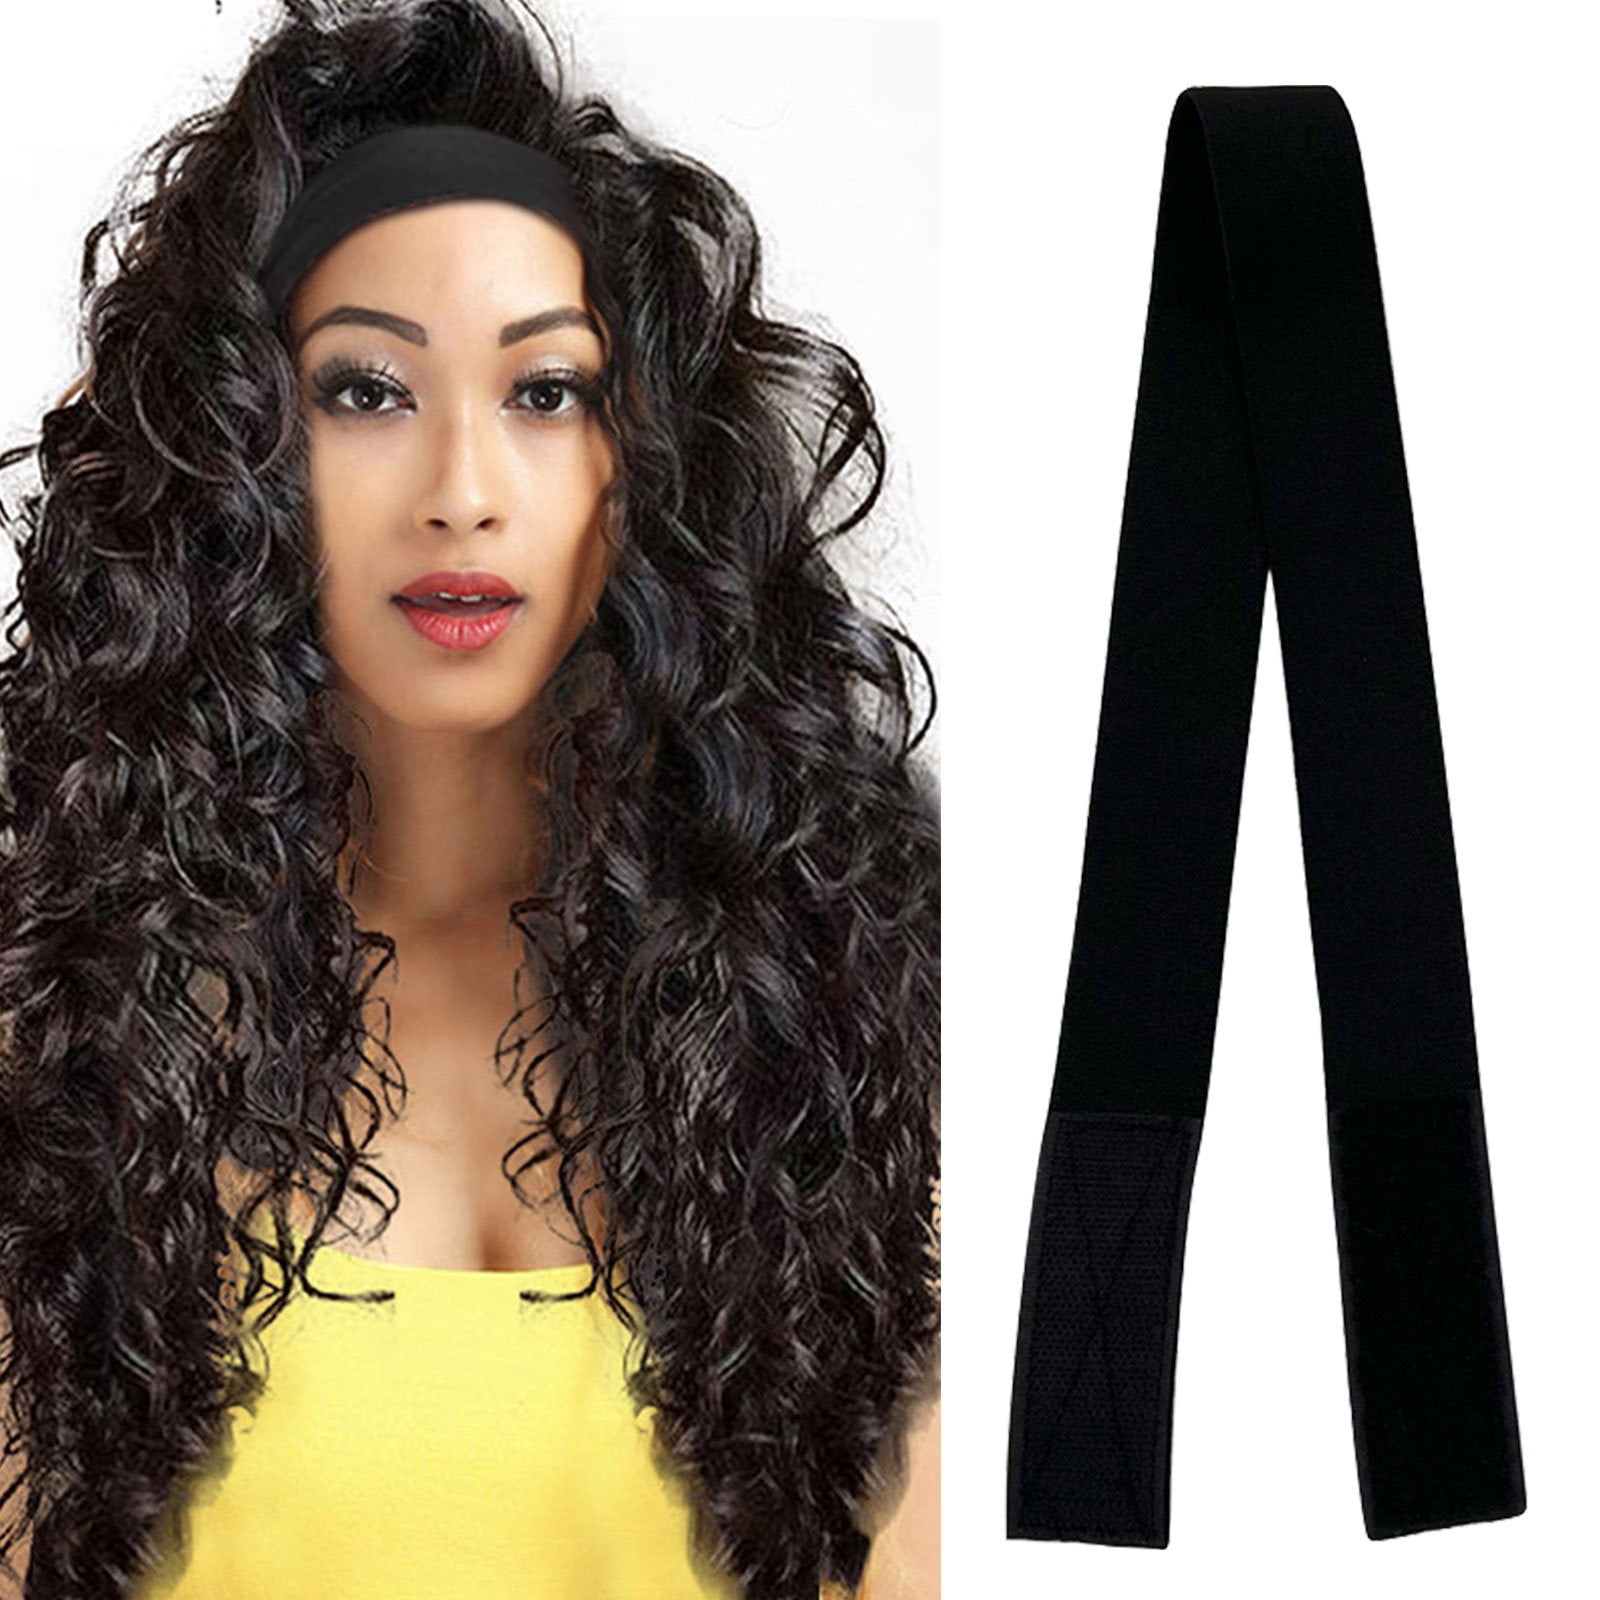  Elastic Band for Lace Frontal Melt, 4 PCS Lace Melting Band  for Lace Wigs, Elastic Band for Melting Lace, Lace Band Wig Bands for Edges  Wig Melt Band，Wigs Supplies, Wig